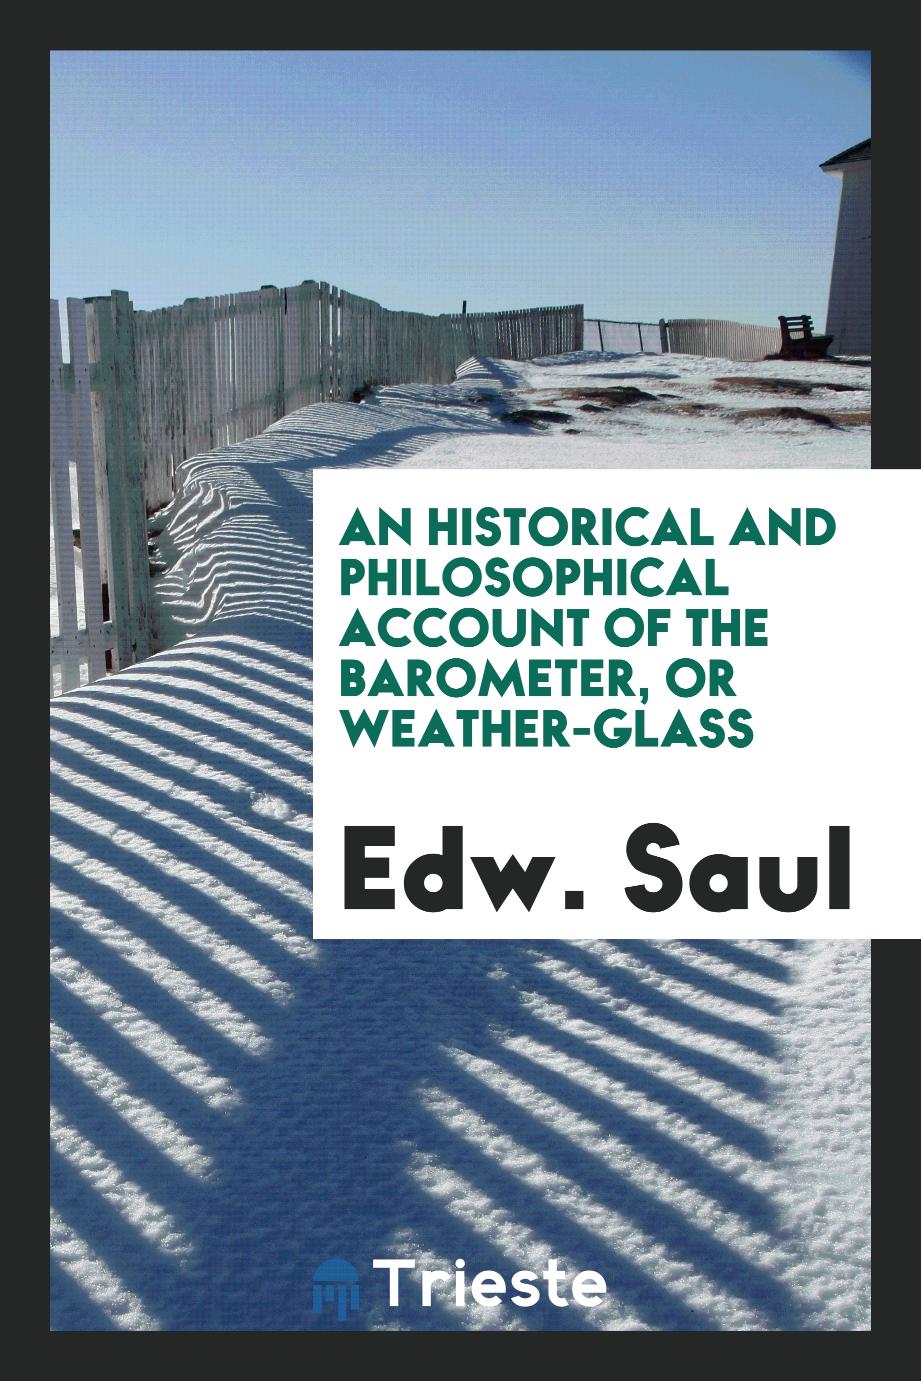 An Historical and Philosophical Account of the Barometer, or Weather-Glass